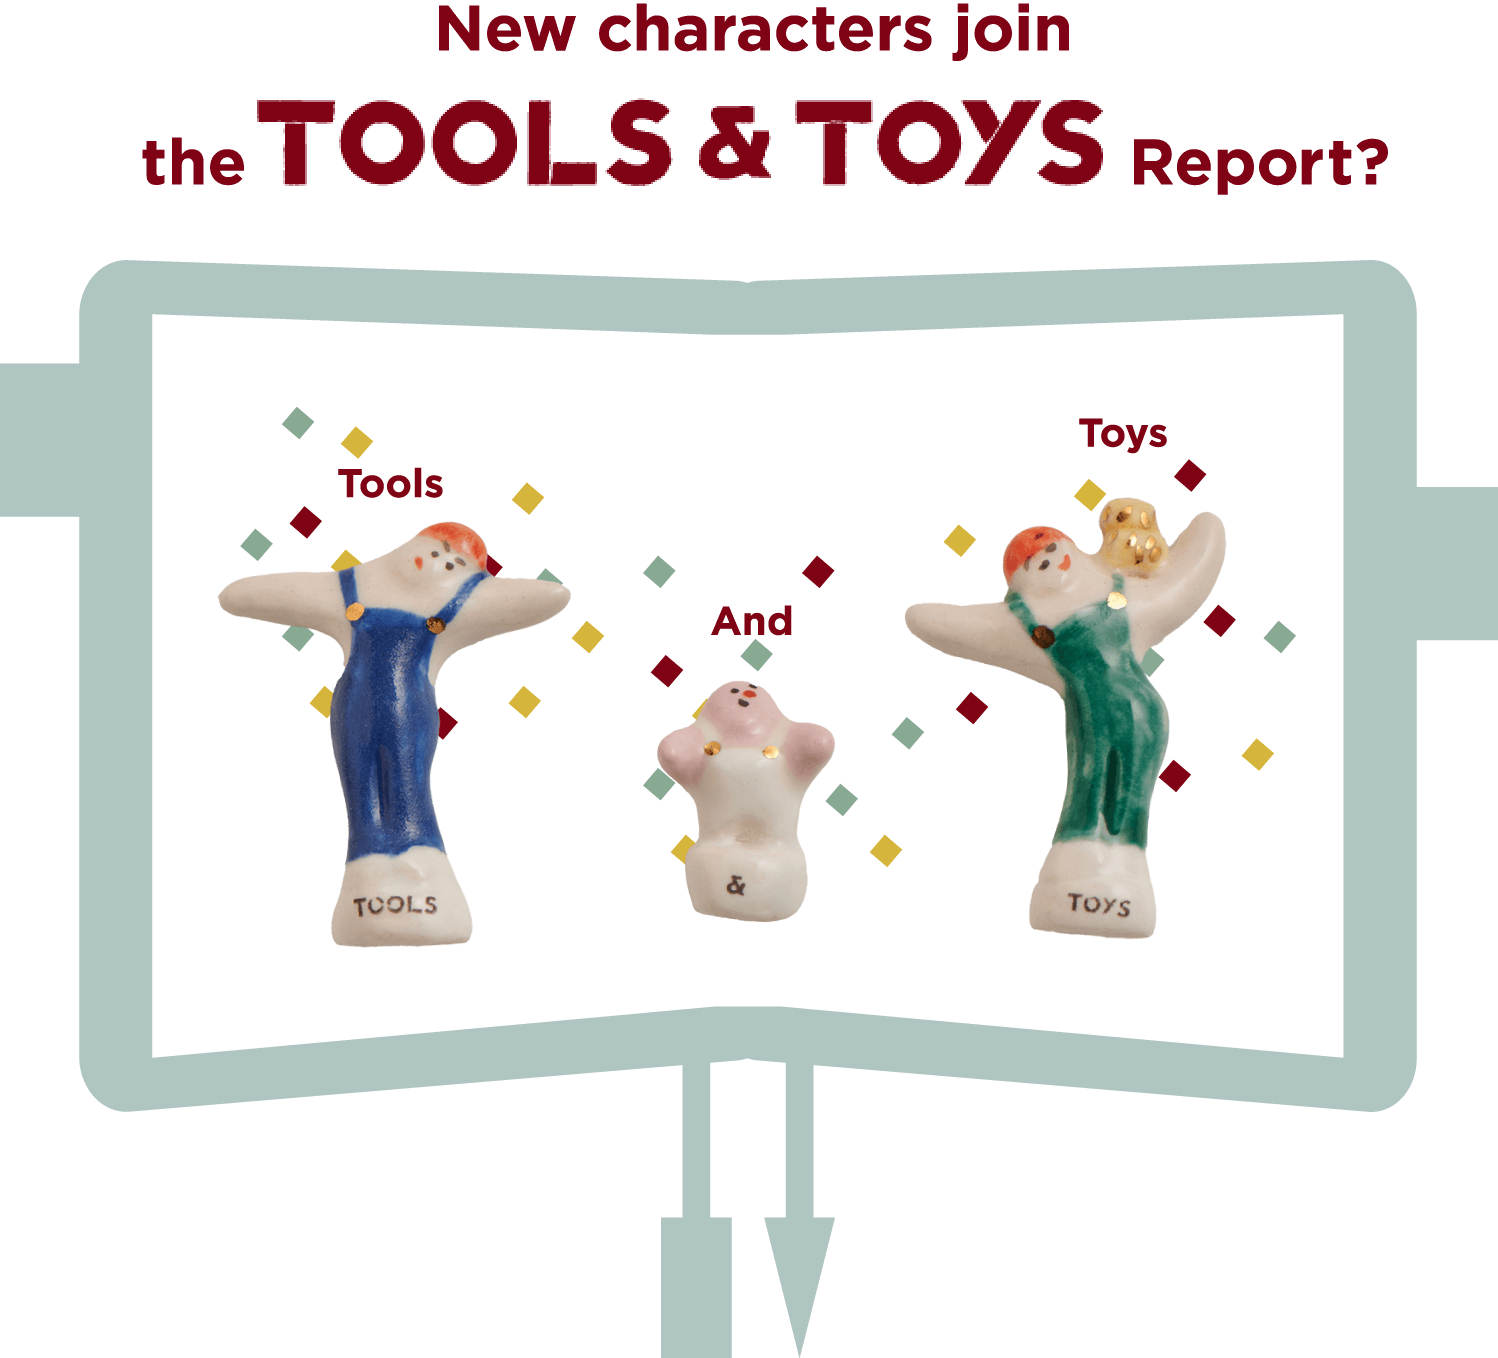 New characters join the Tools & Toys Report?